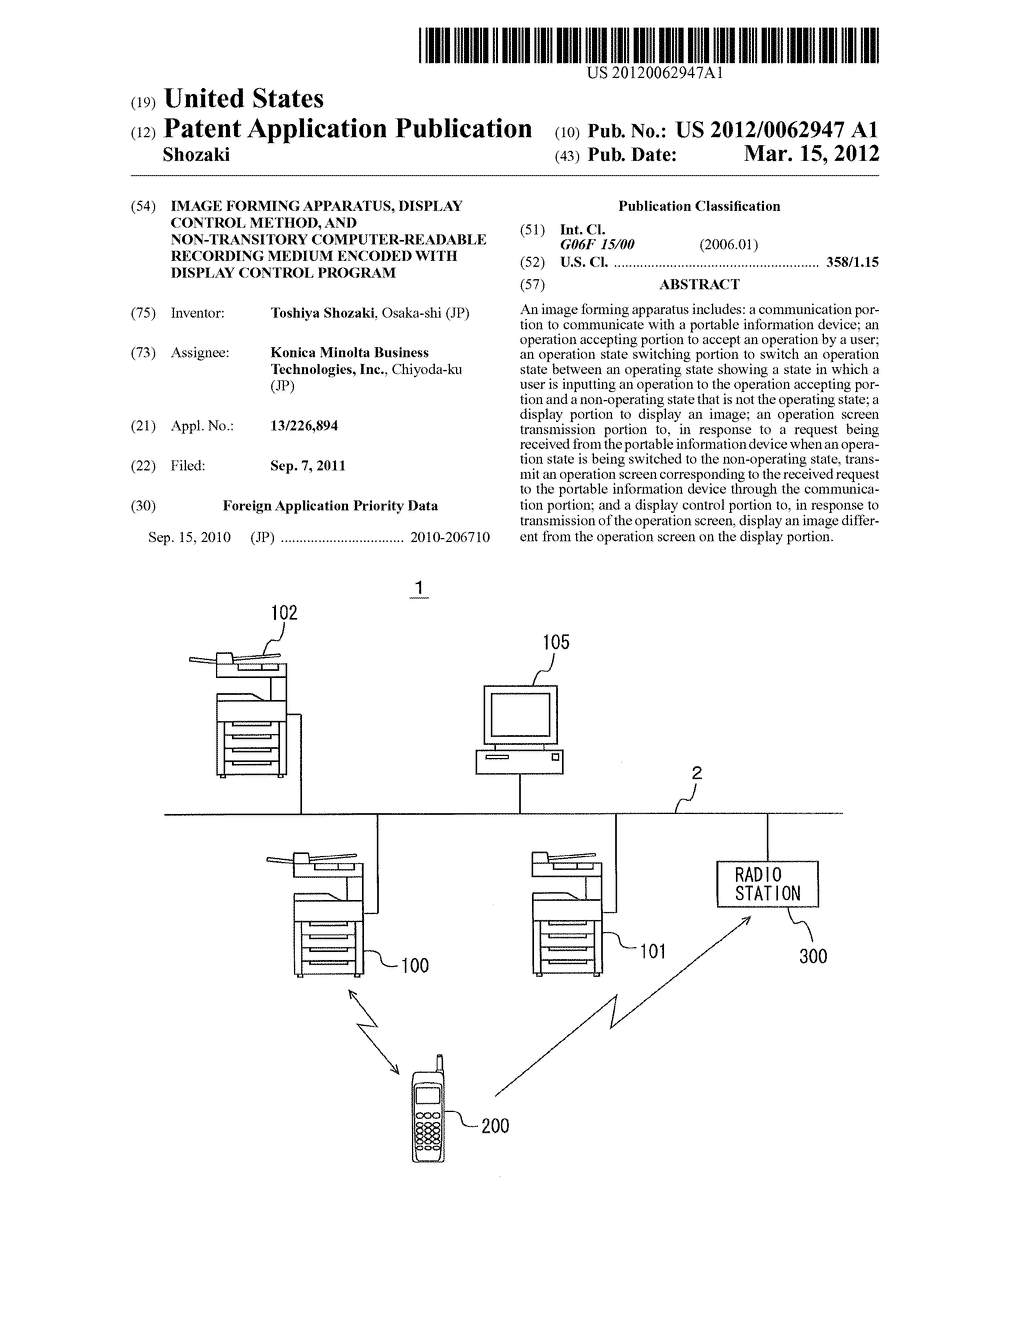 IMAGE FORMING APPARATUS, DISPLAY CONTROL METHOD, AND NON-TRANSITORY     COMPUTER-READABLE RECORDING MEDIUM ENCODED WITH DISPLAY CONTROL PROGRAM - diagram, schematic, and image 01